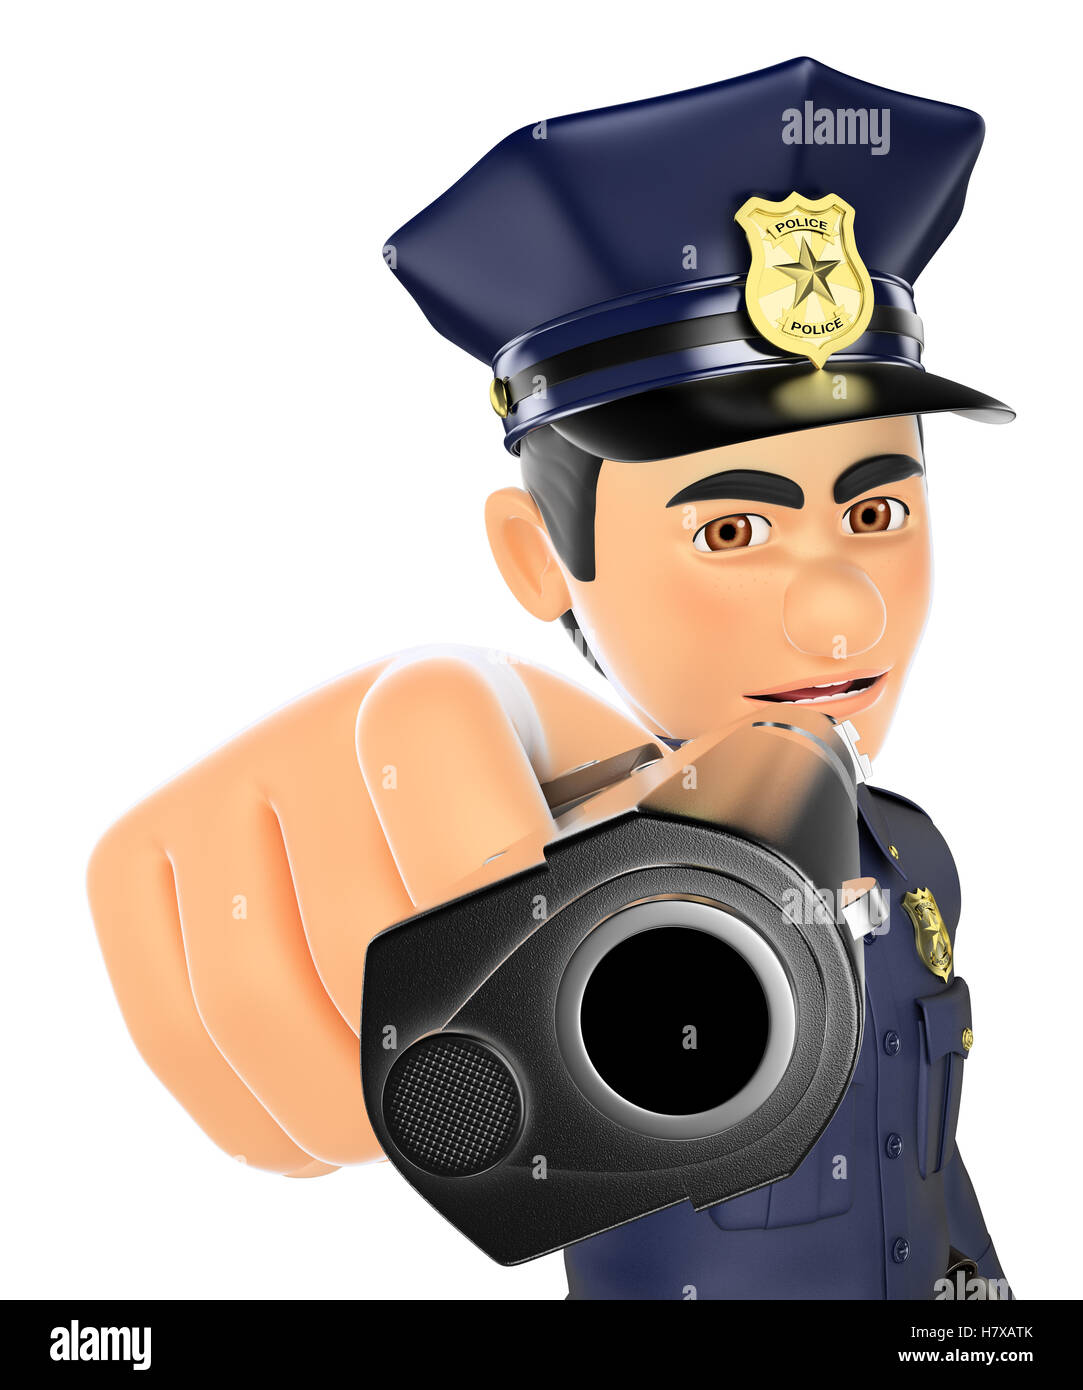 3d security forces people illustration. Policeman pointing a gun in front. Isolated white background. Stock Photo